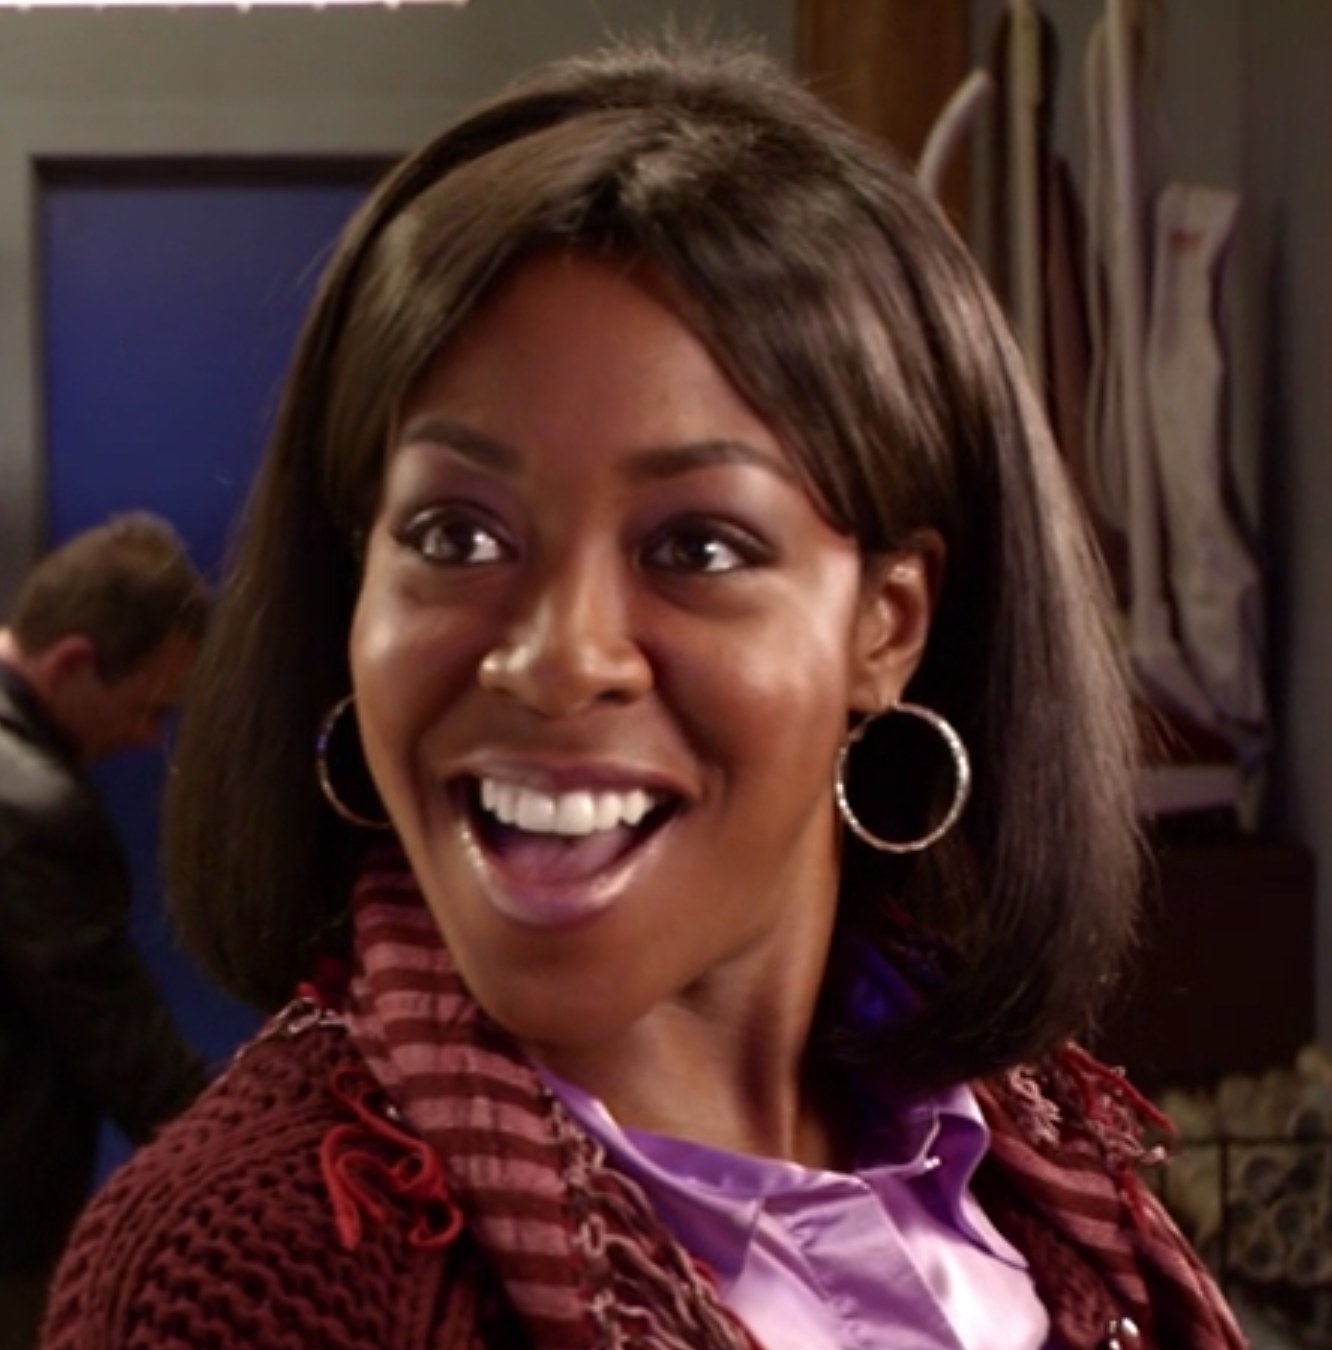 Tichina Arnold as Rochelle looks for a new TV for the family